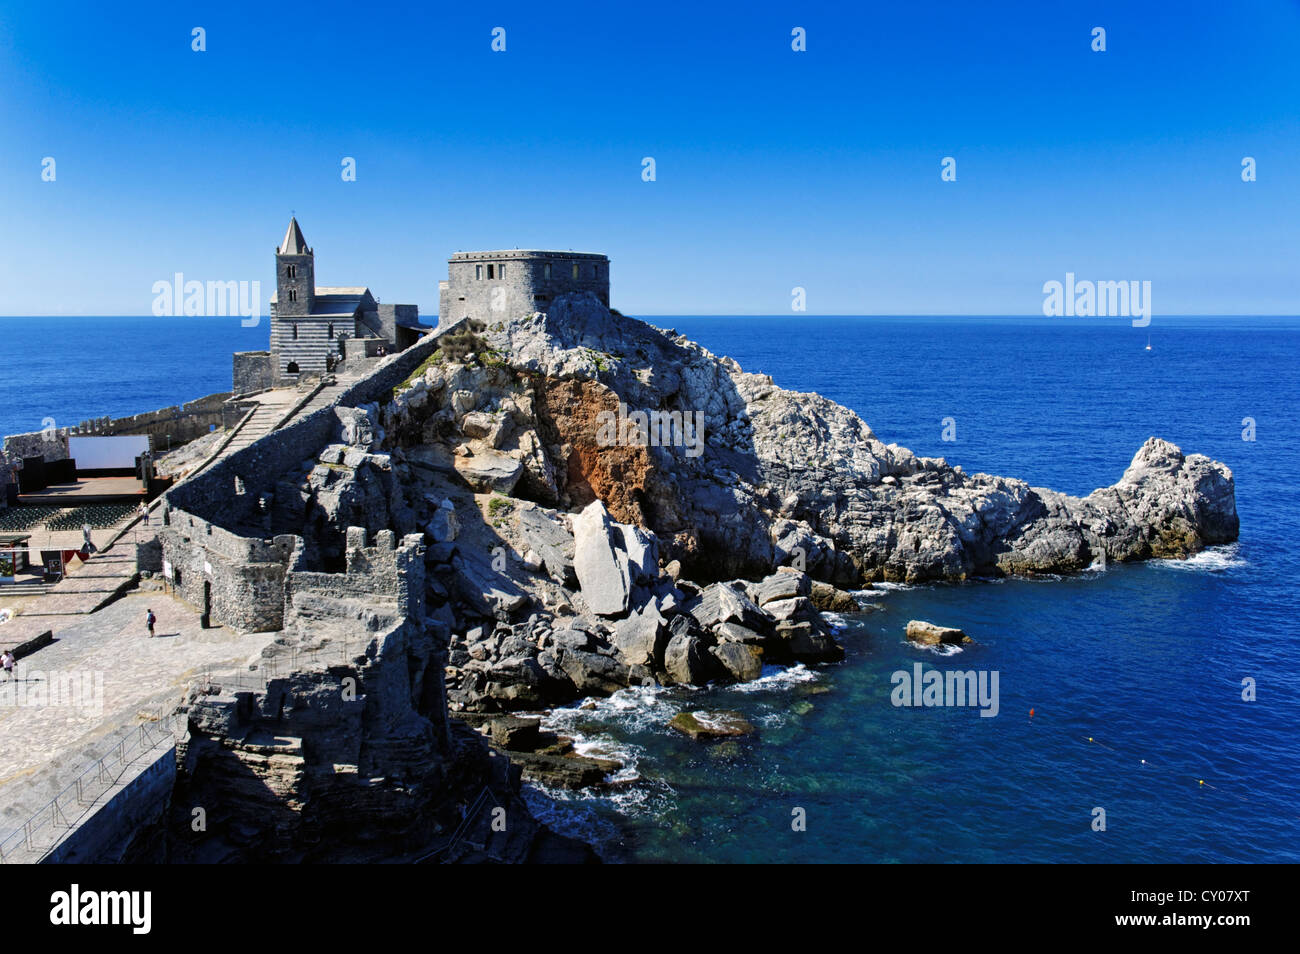 Spectacular view of St Peters church and stronghold in the Italian coastal town of Porto Venere Stock Photo